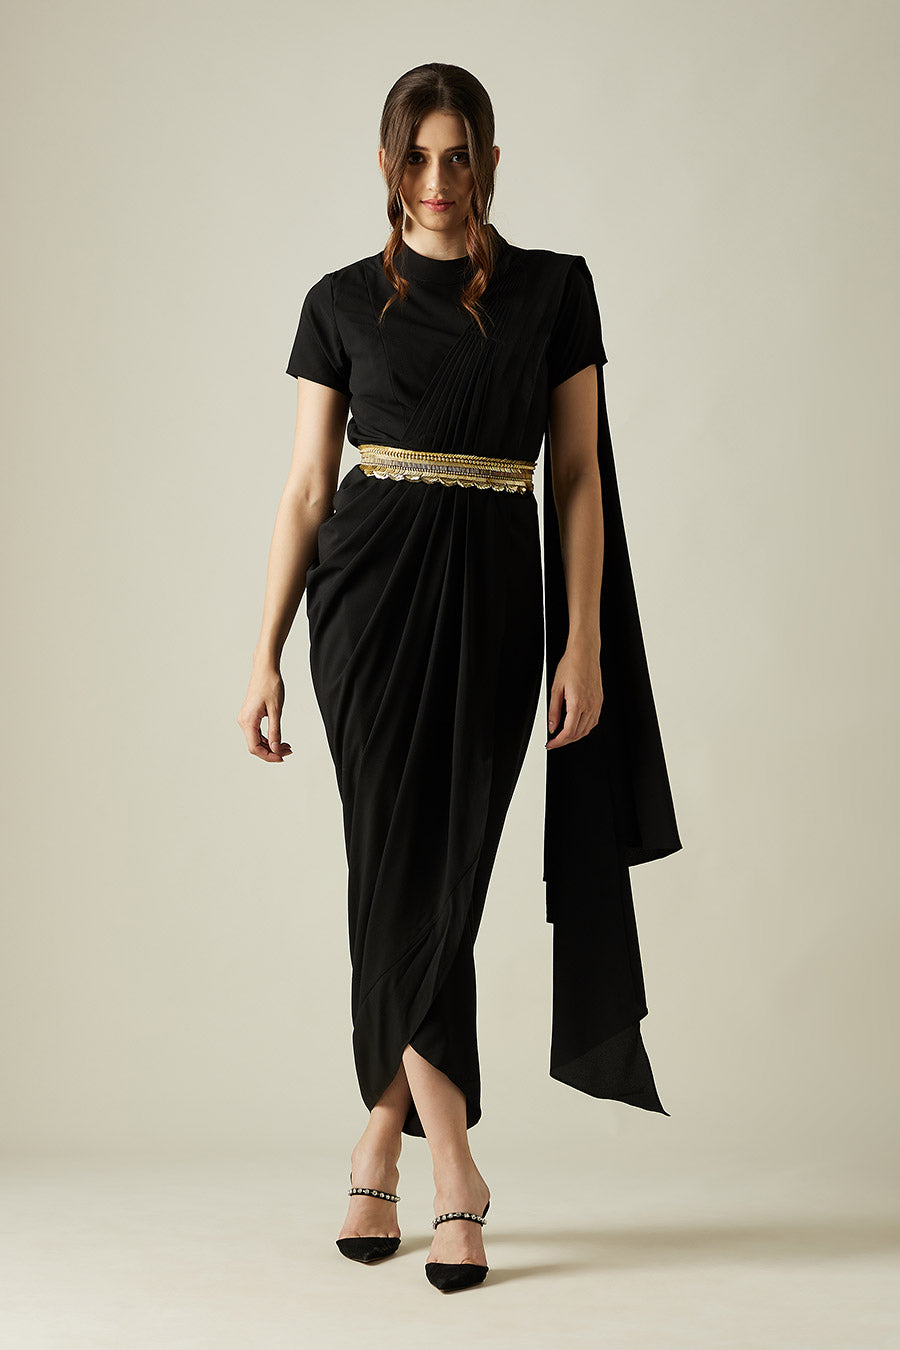 Shop Black Saree Dress With Molten Gold Belt by AAKAAR at House of ...